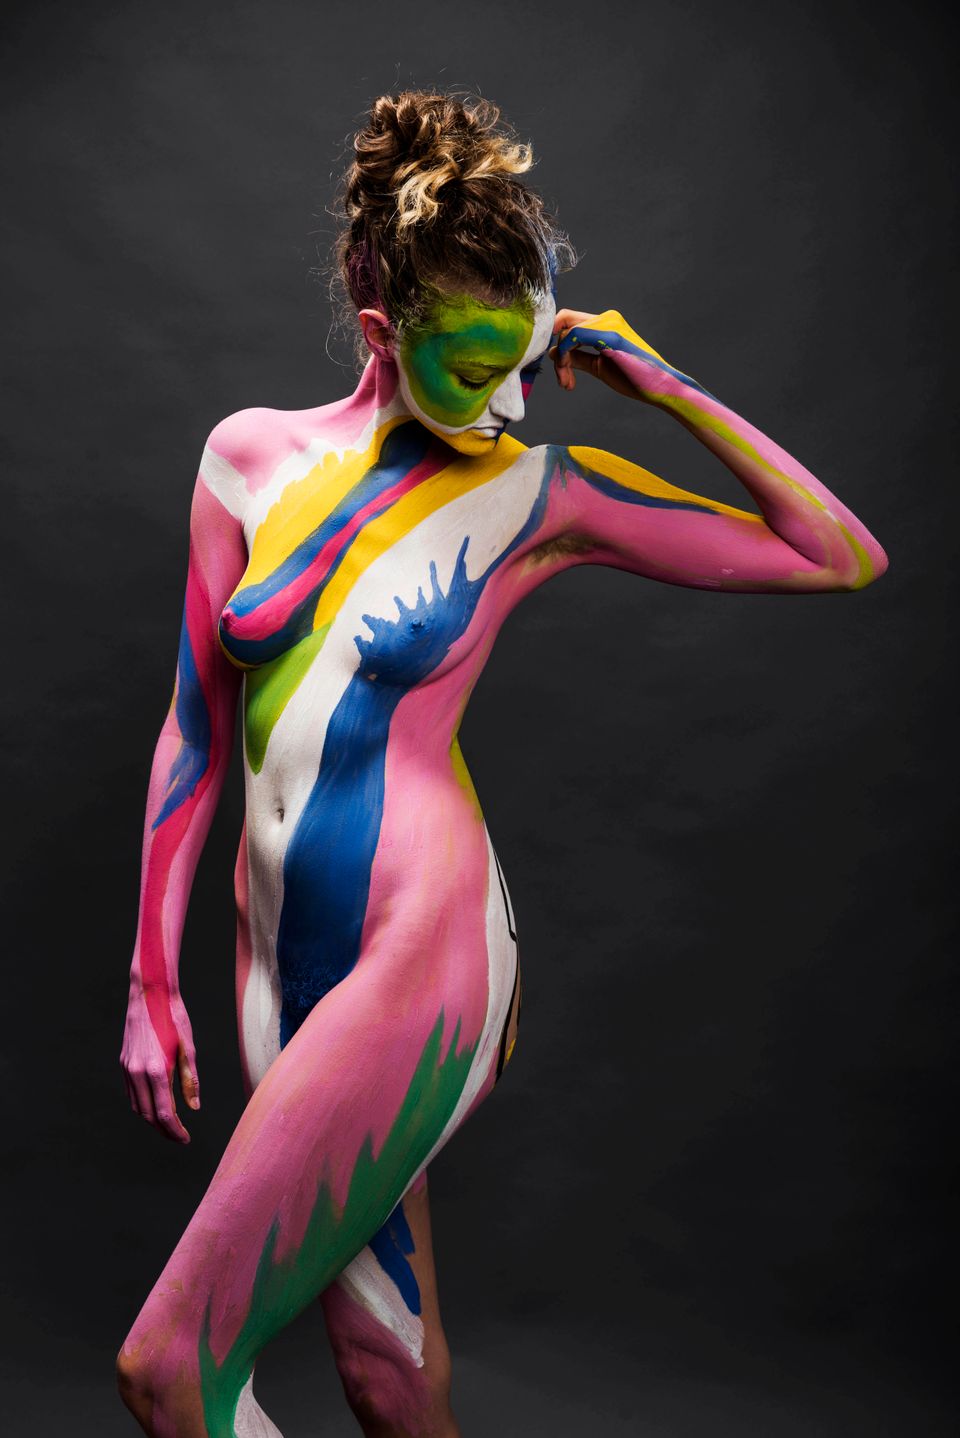 amna ghafoor add photo body painted naked girls